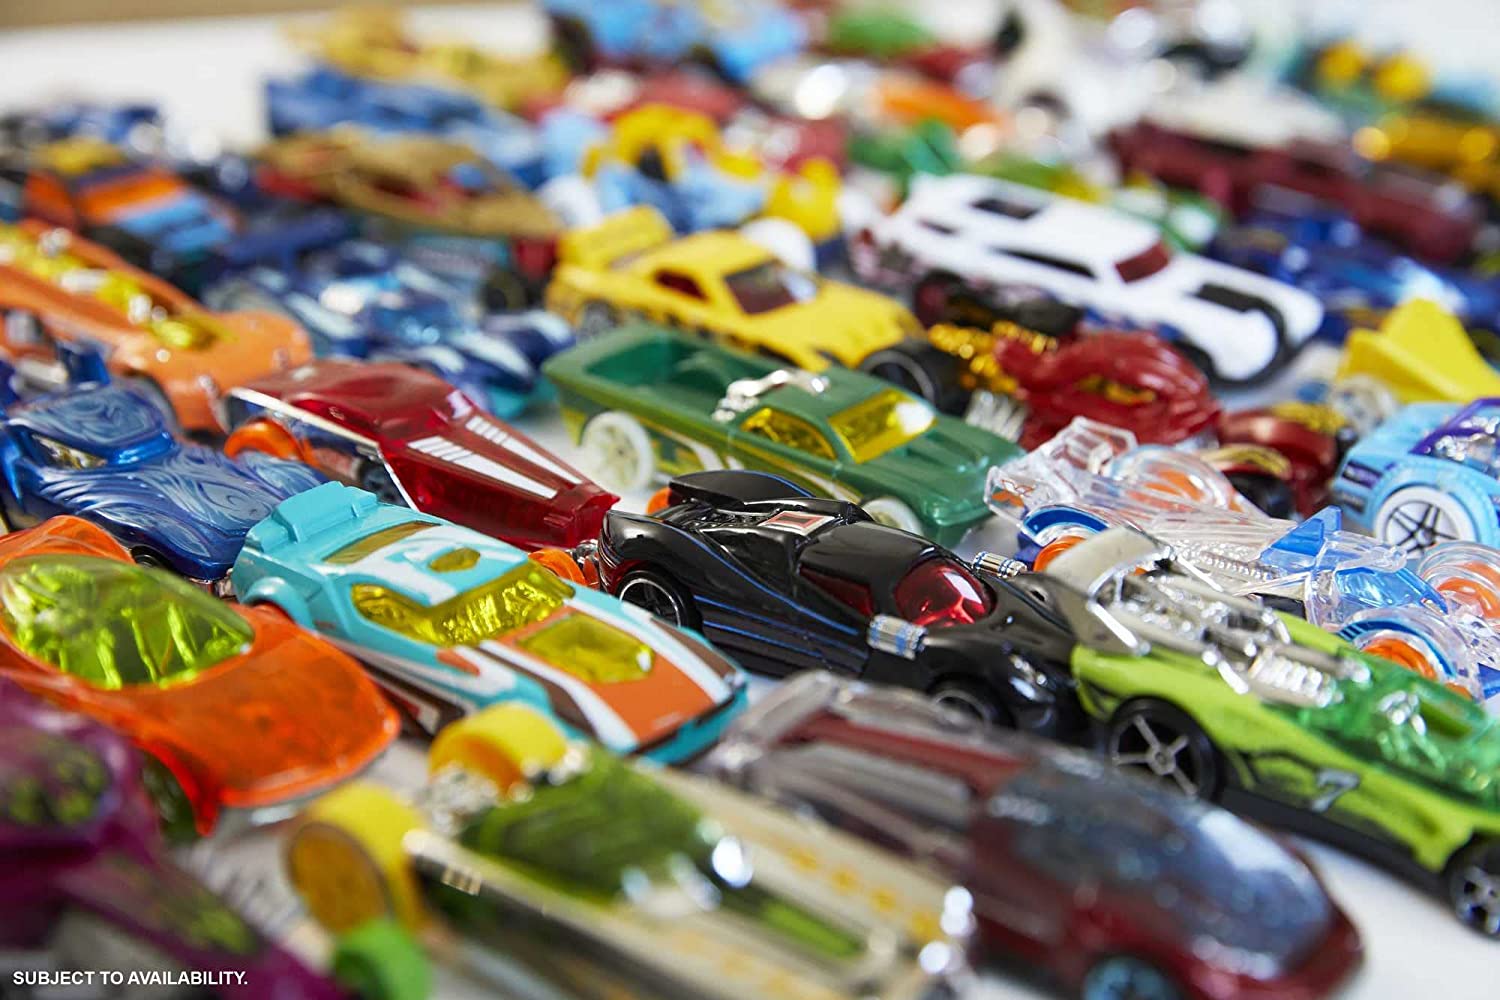 Hot Wheels 20 Car Pack, Styles May Vary - with Authentic Styling And Eye-Catching Decos